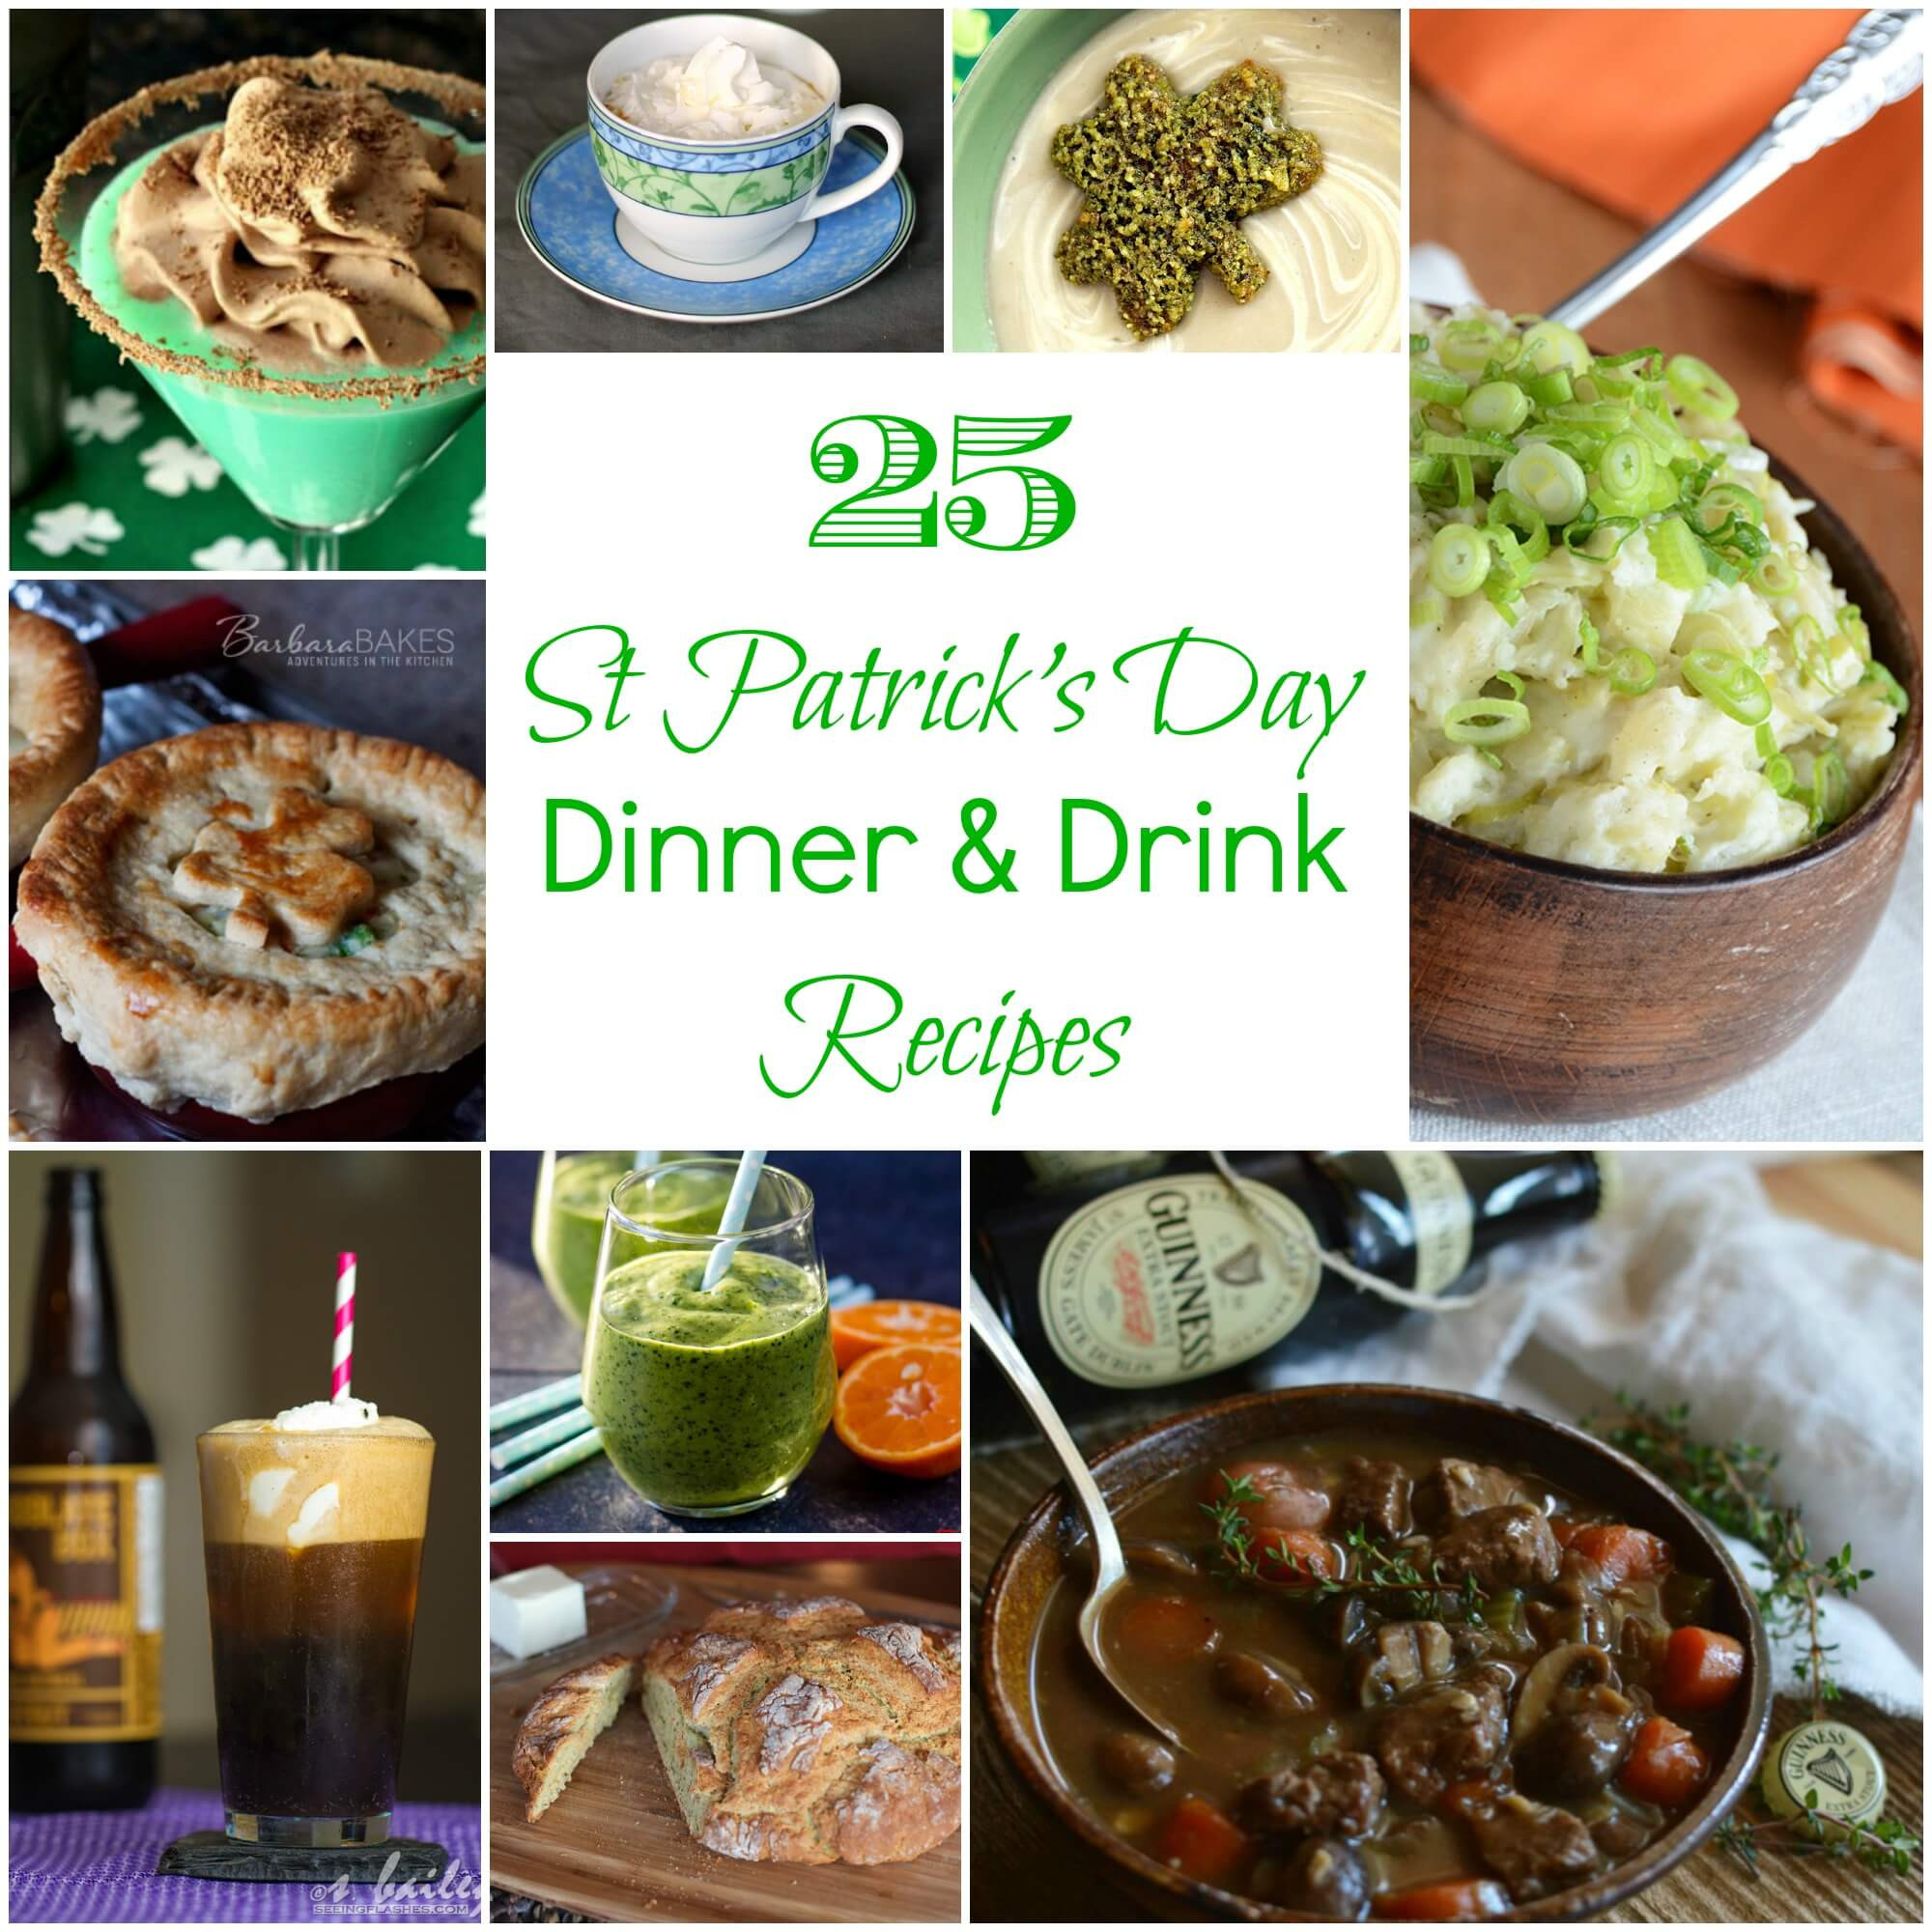 Mother'S Day Dinner Recipes
 25 St Patrick s Day Dinner & Drink Recipes Flavor Mosaic